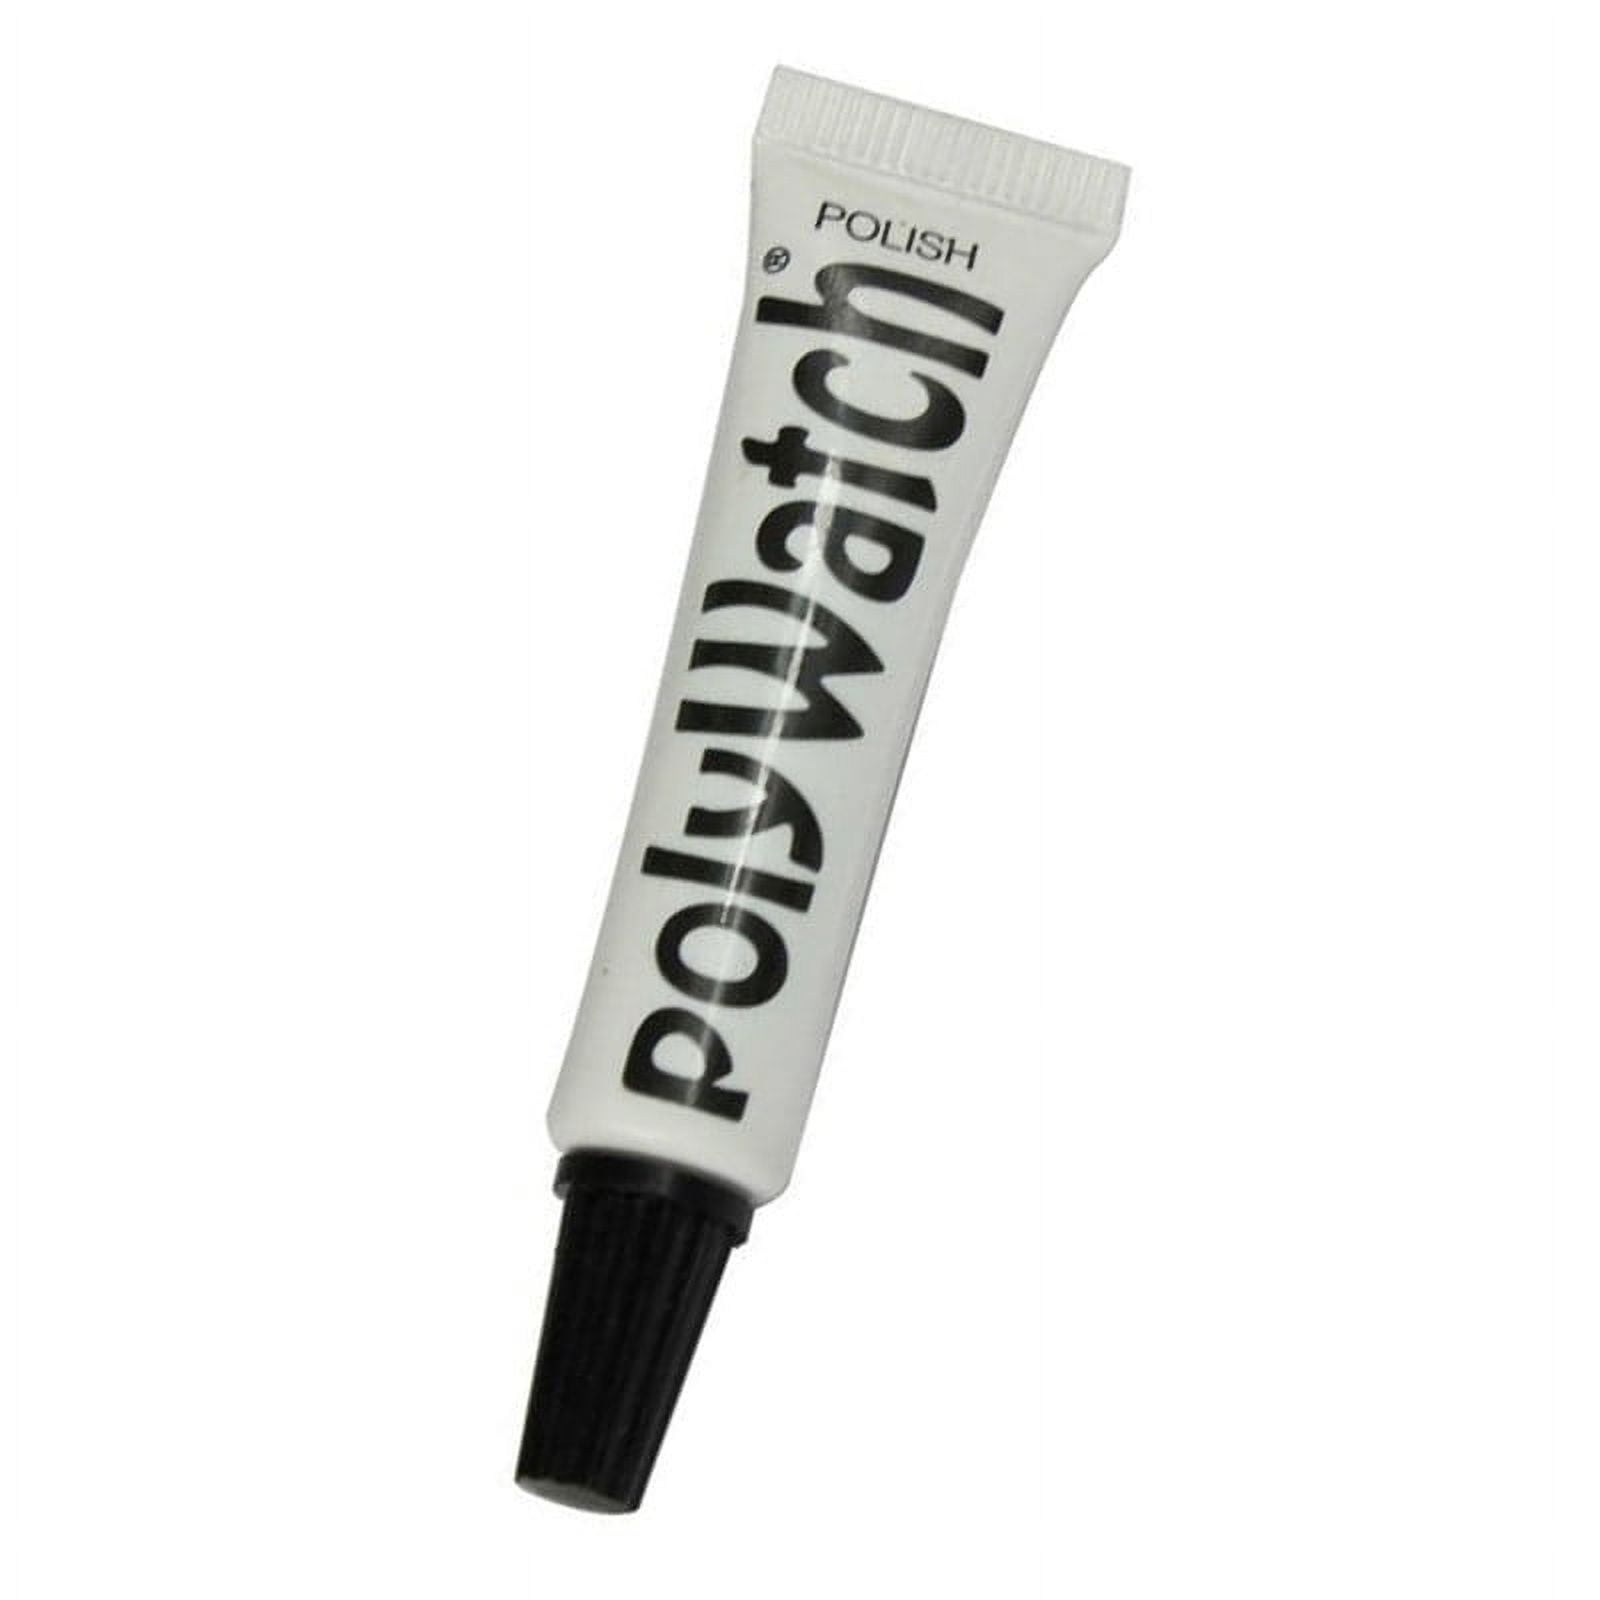 Roseco Store - PolyWatch Plastic Polish Scratch Remover